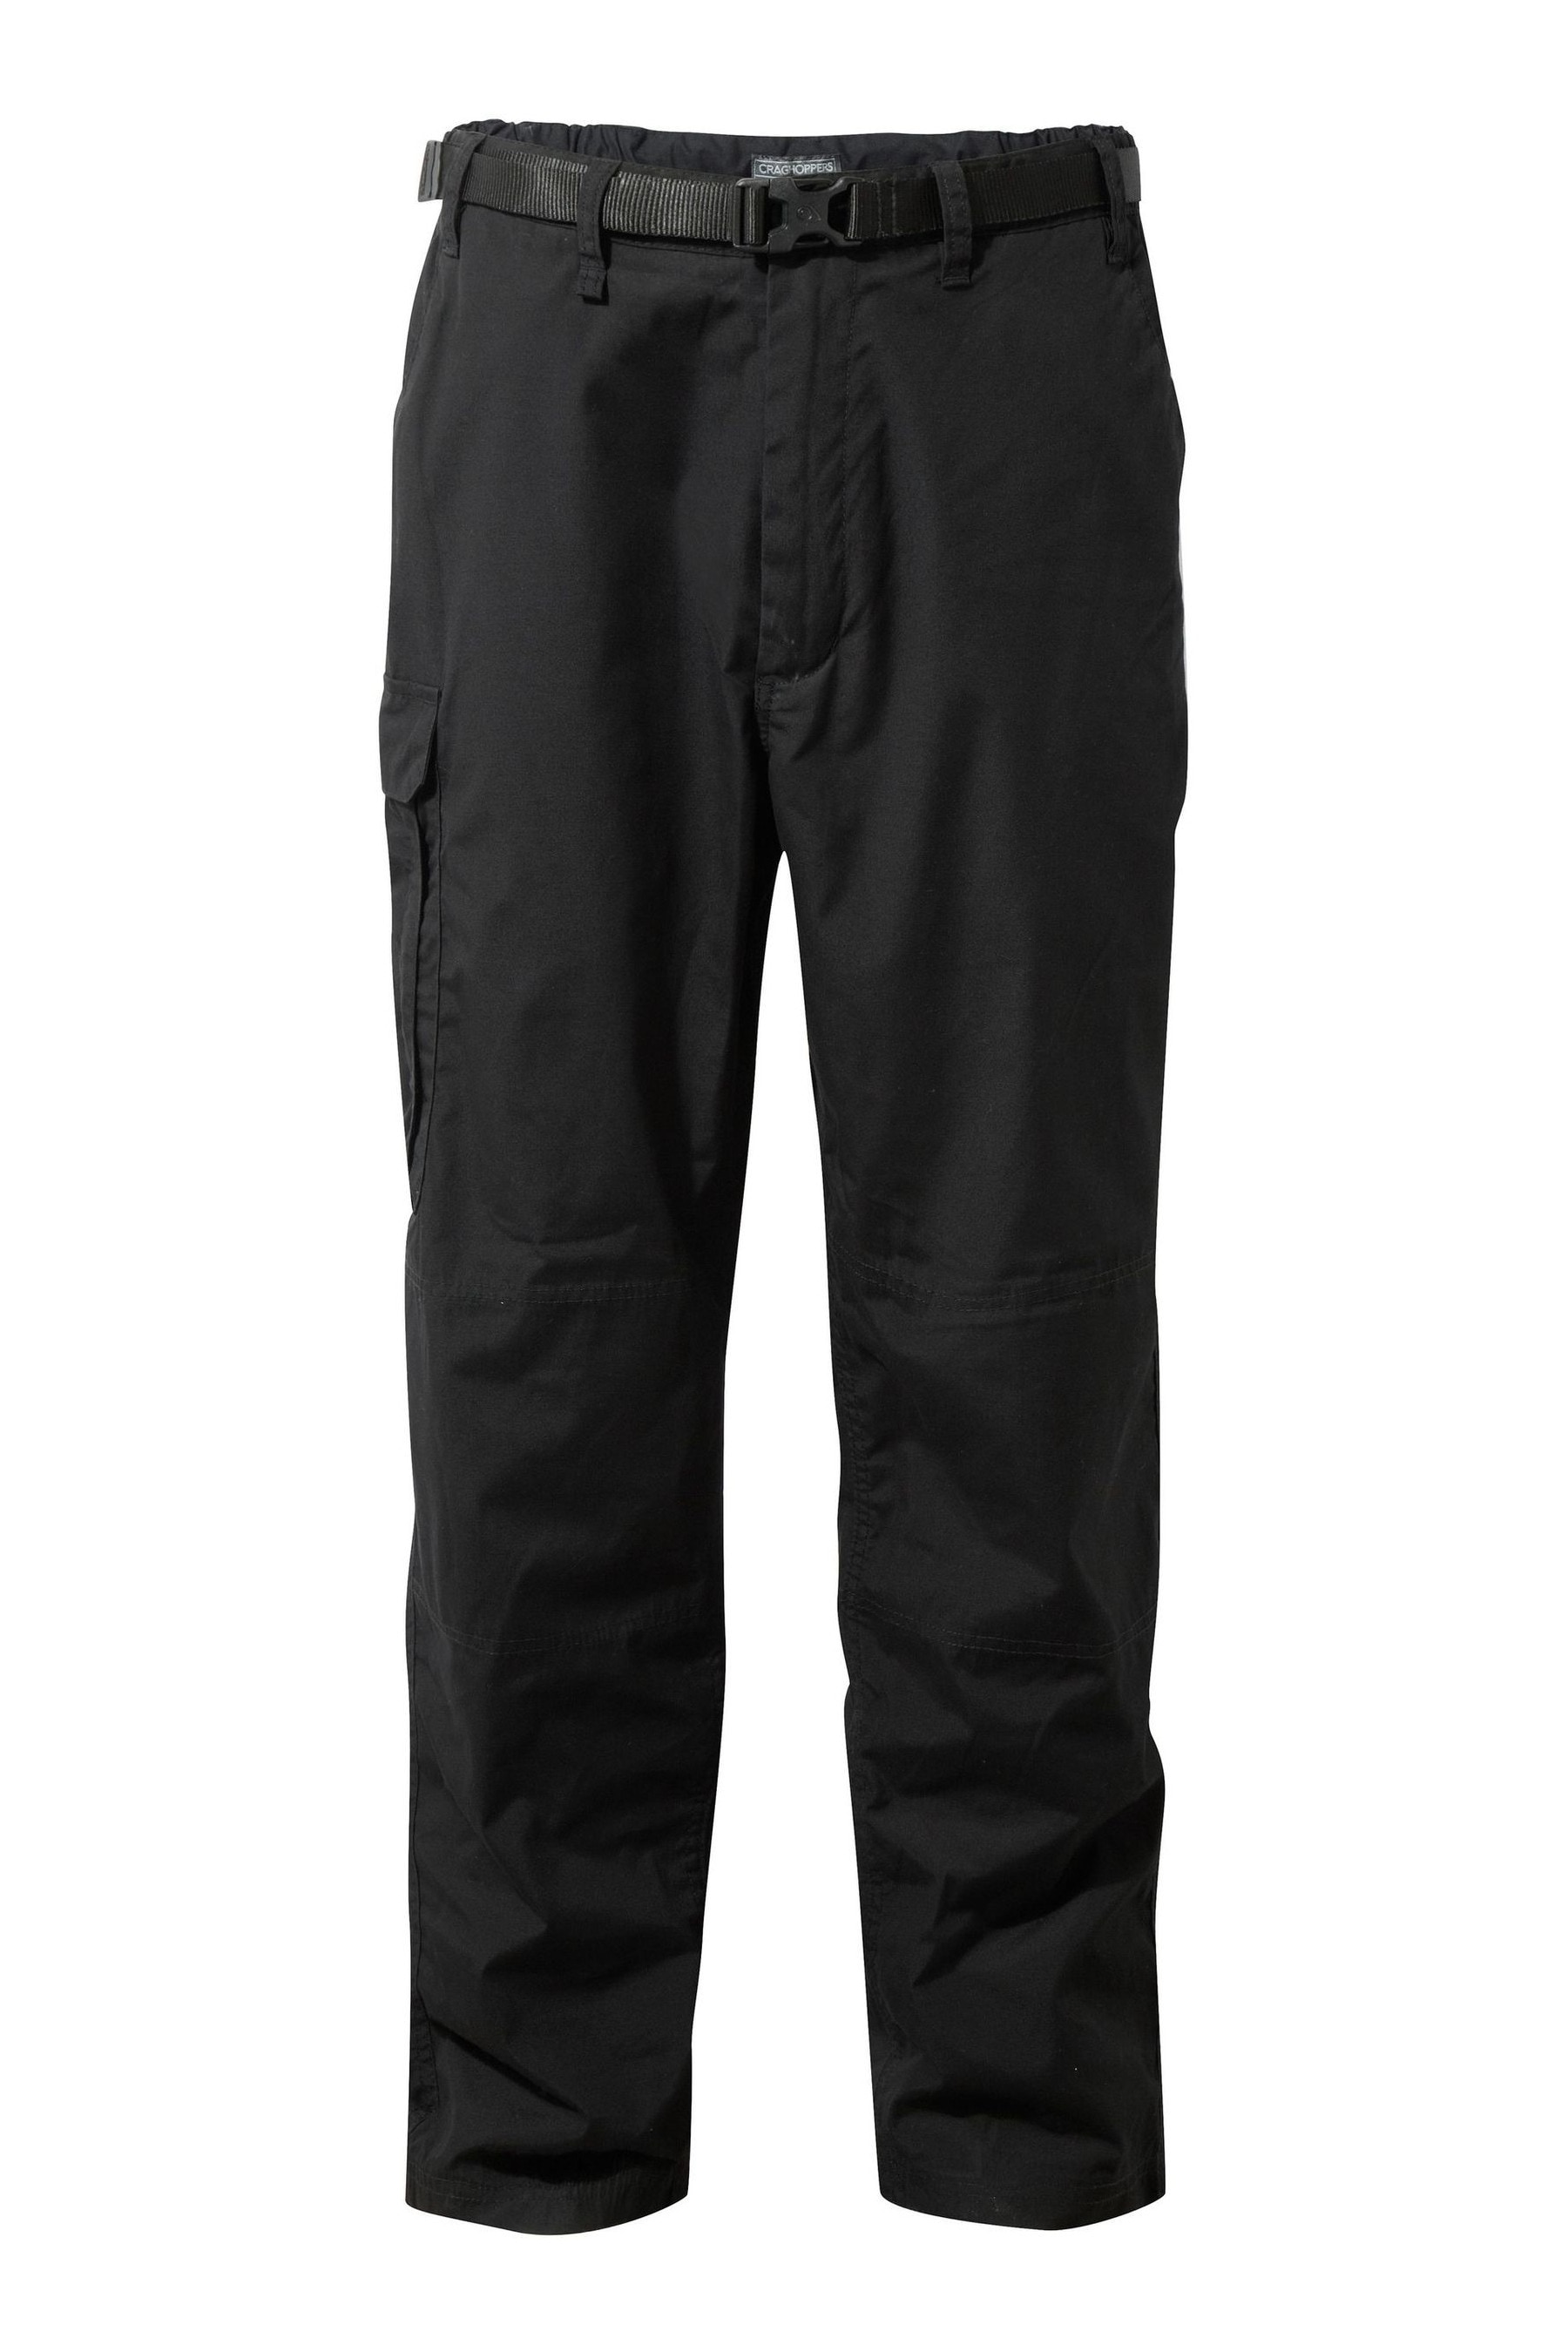 Buy Craghoppers Black Kiwi Classic Trousers from the Next UK online shop